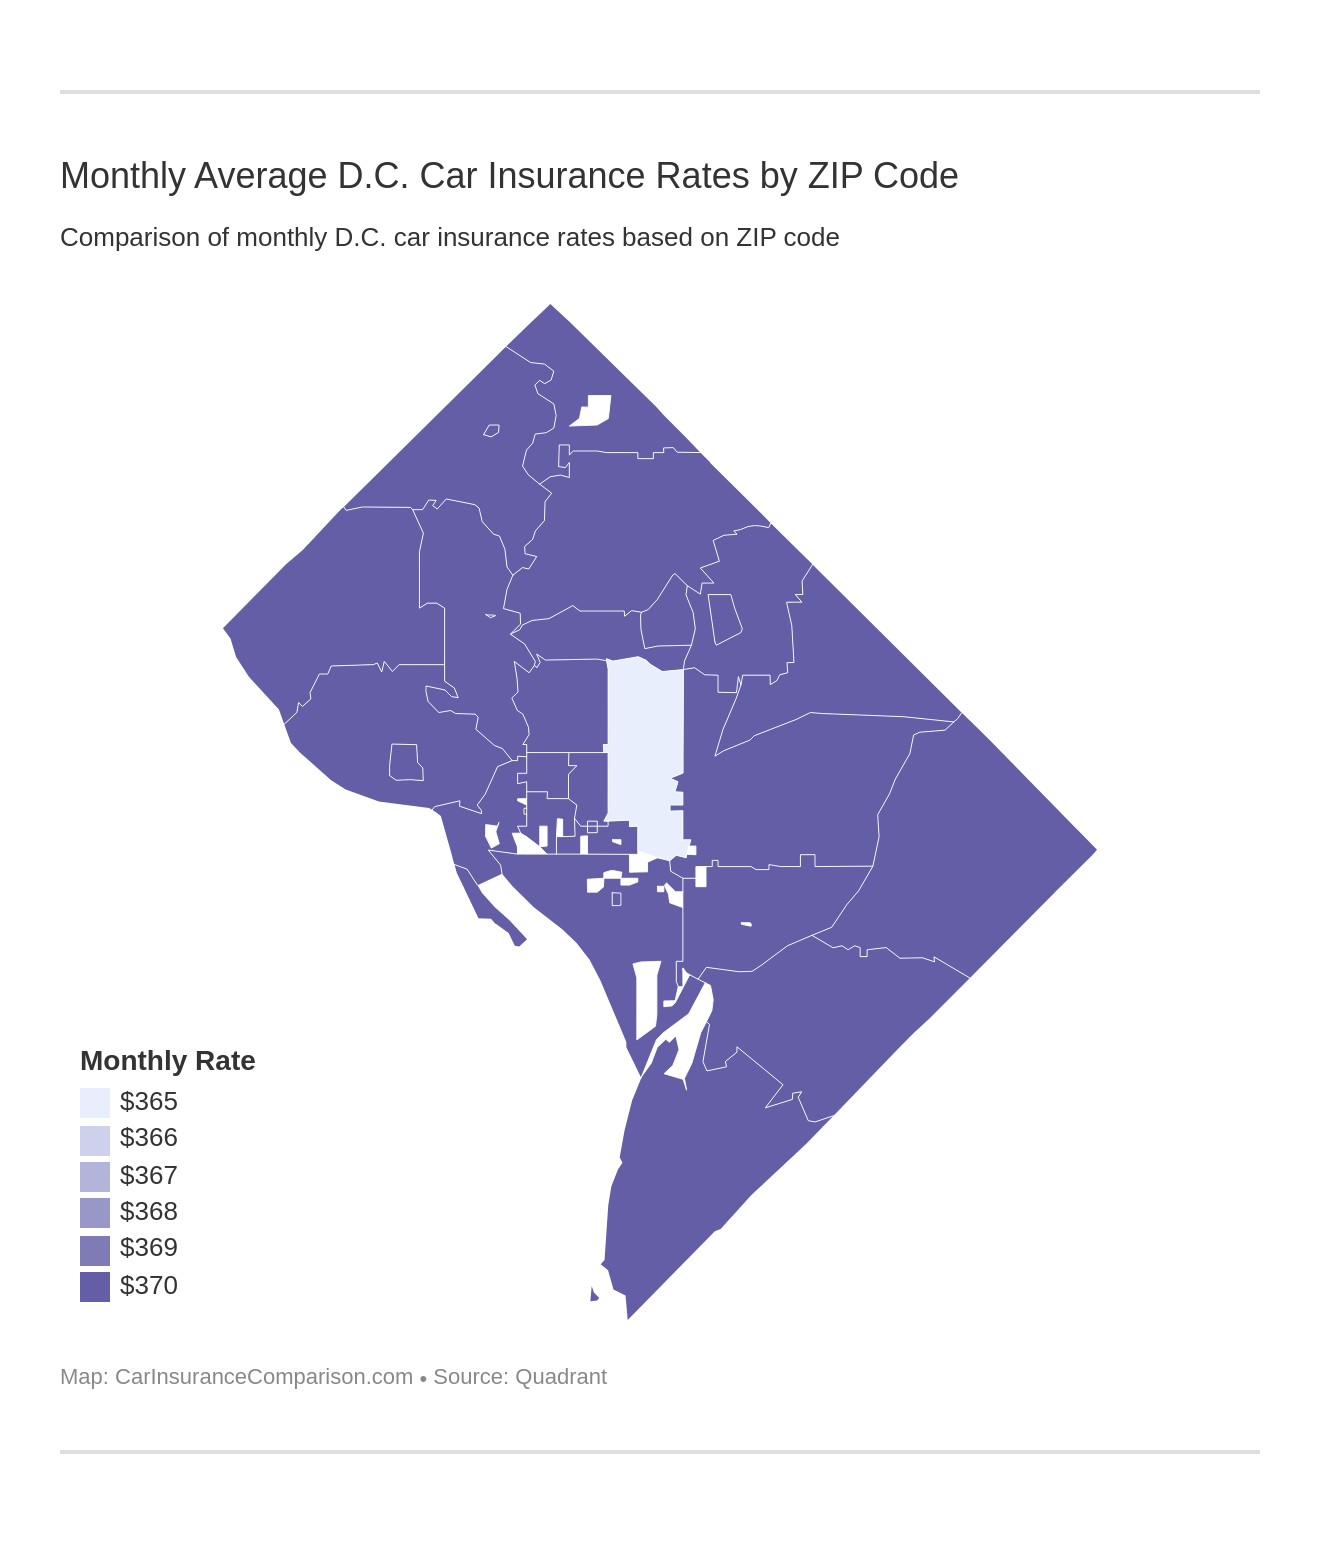 Monthly Average D.C. Car Insurance Rates by ZIP Code